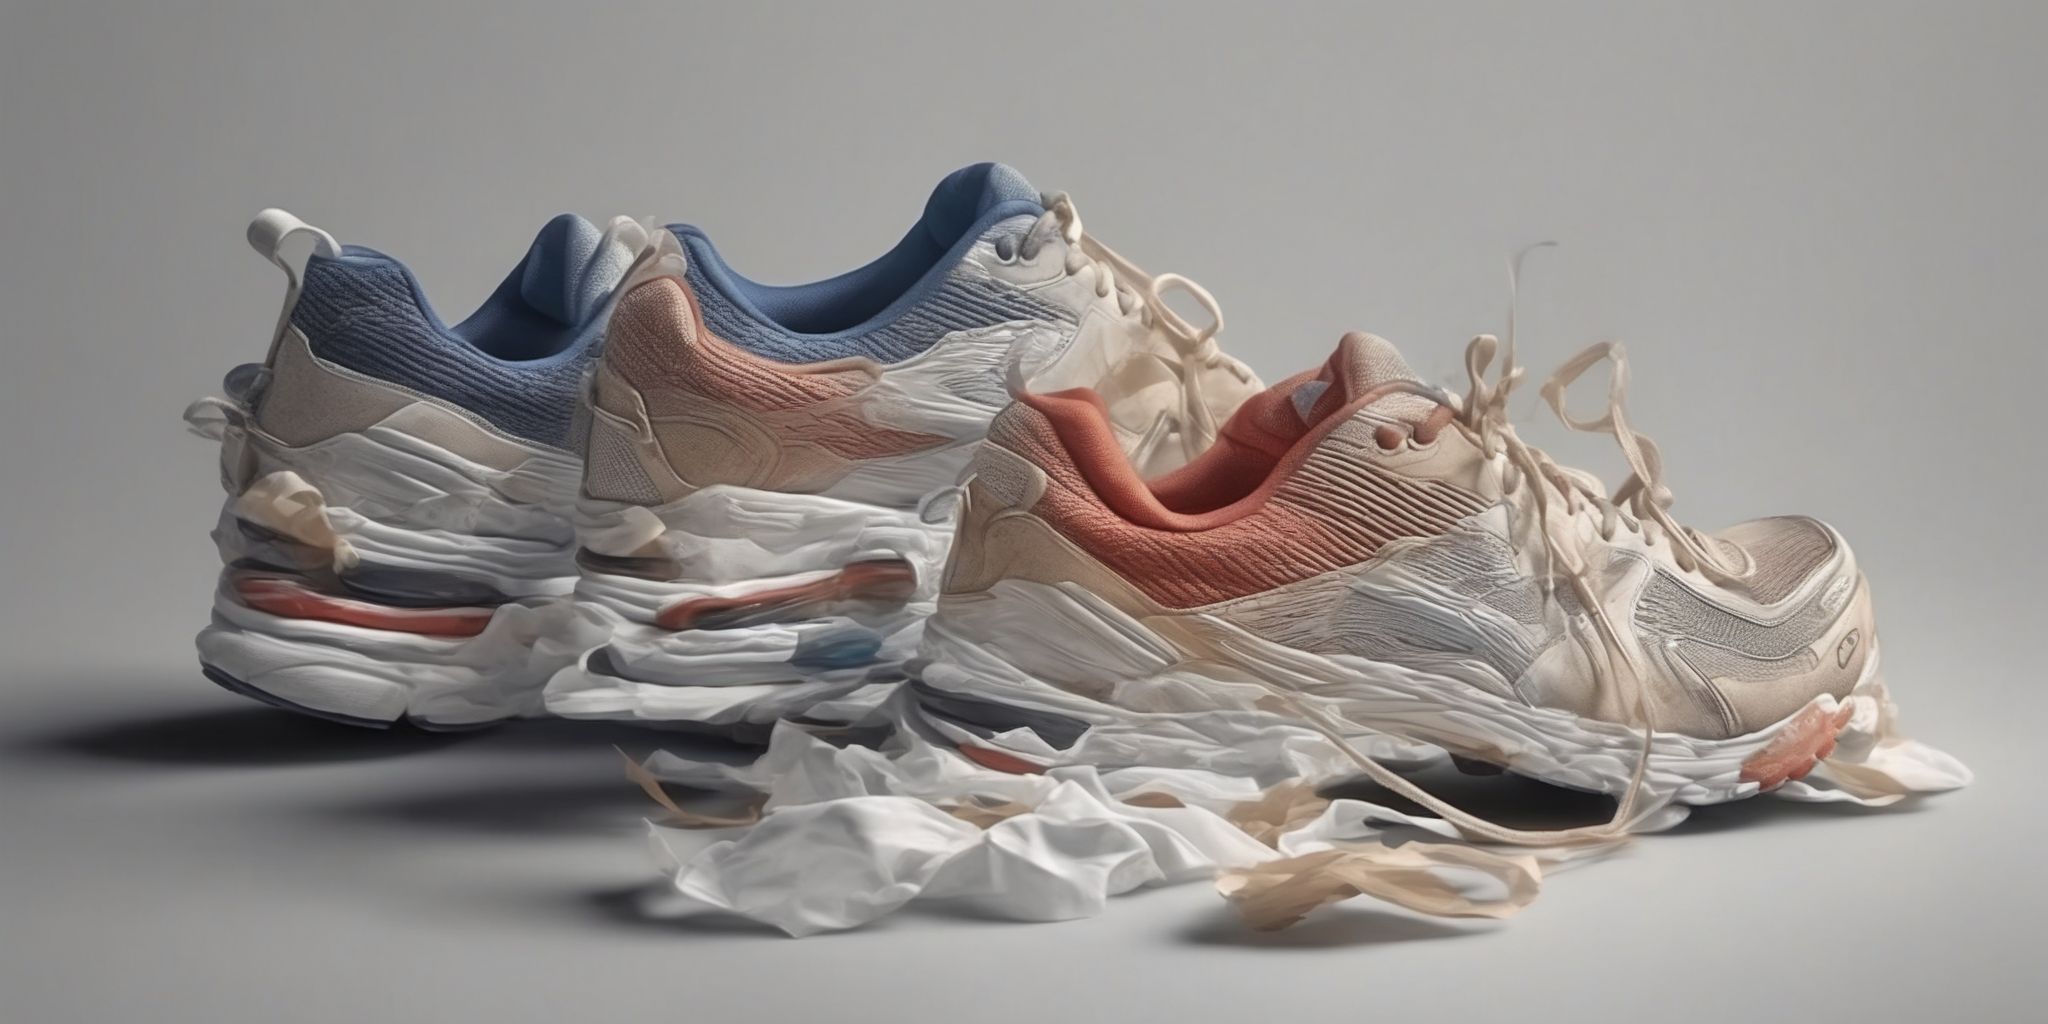 Running shoes  in realistic, photographic style